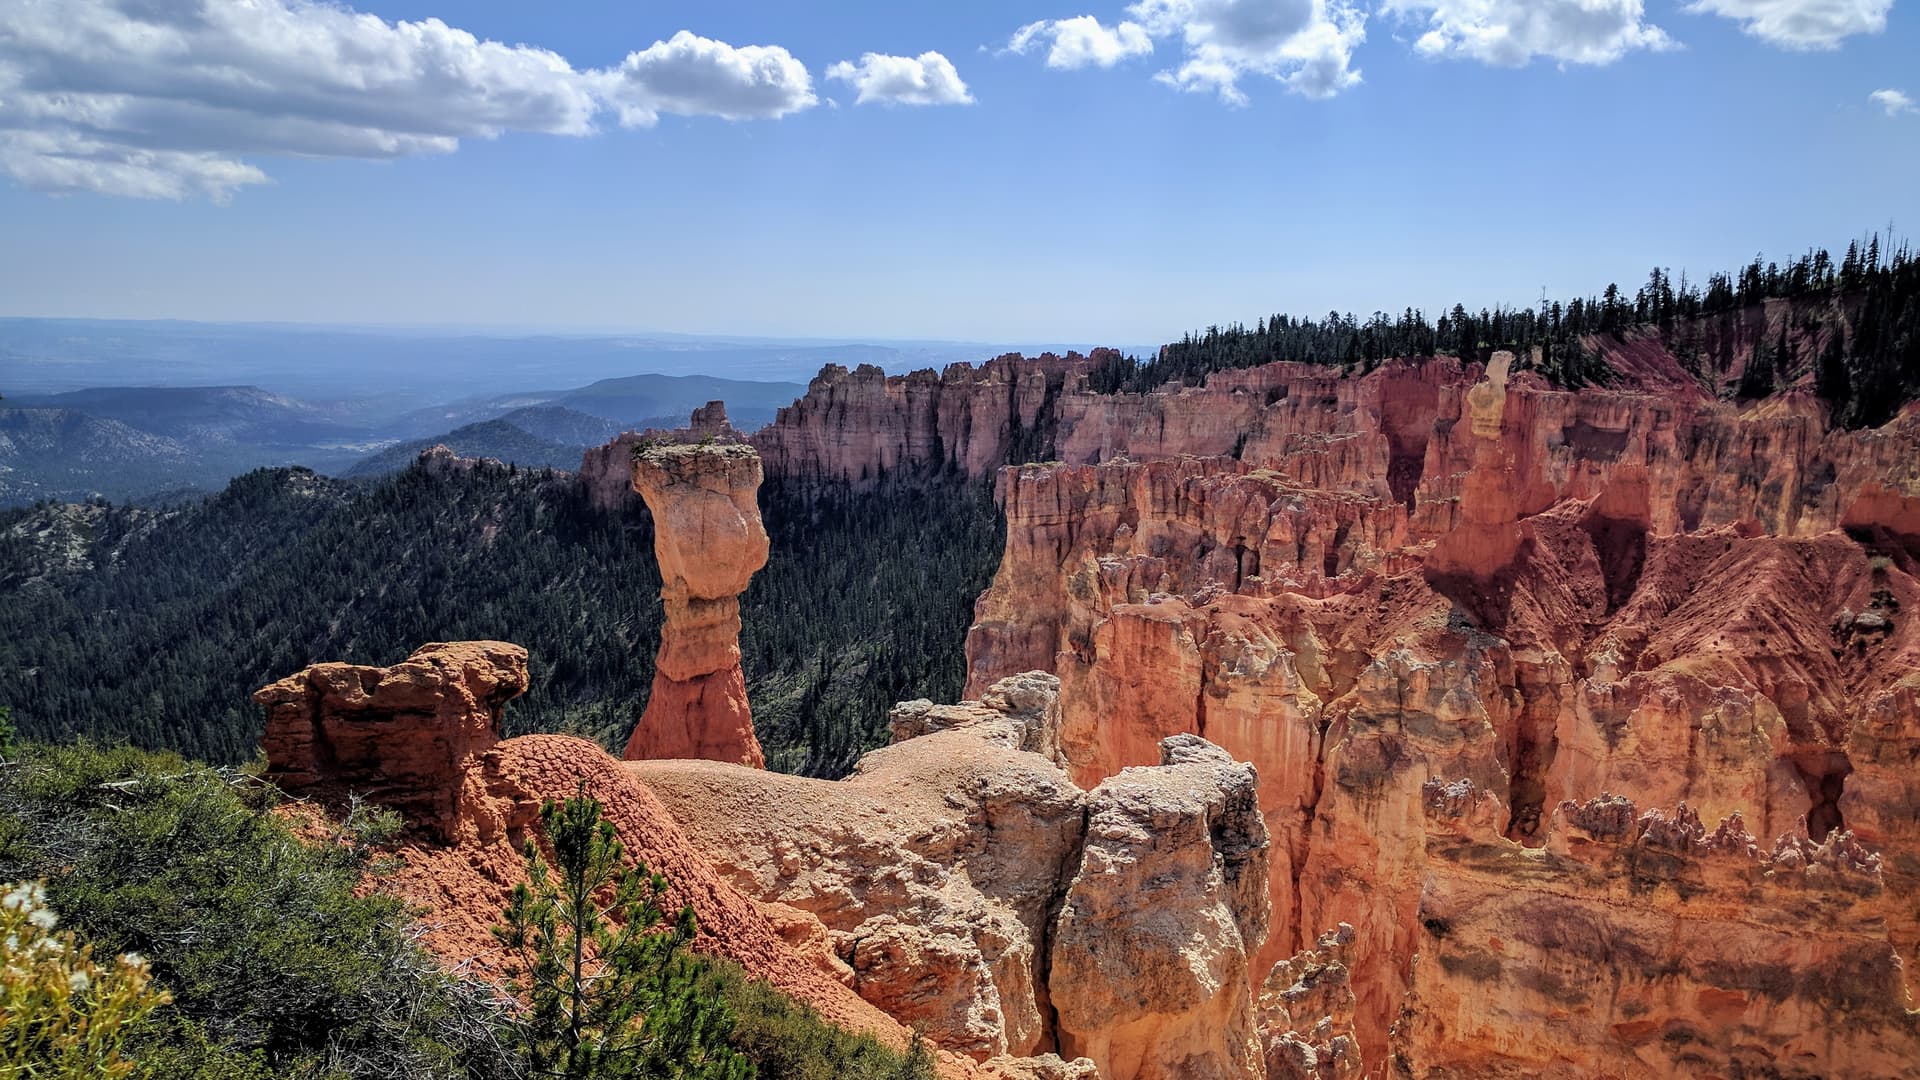 Red and white pillars of soft rock cluster together, eventually becoming the South Wall of Bryce Canyon. The pillars stop abruptly, and are immediately replaced by a pine forest. At left stands an exceptionally tall pillar, which is higher than the Canyon wall itself.